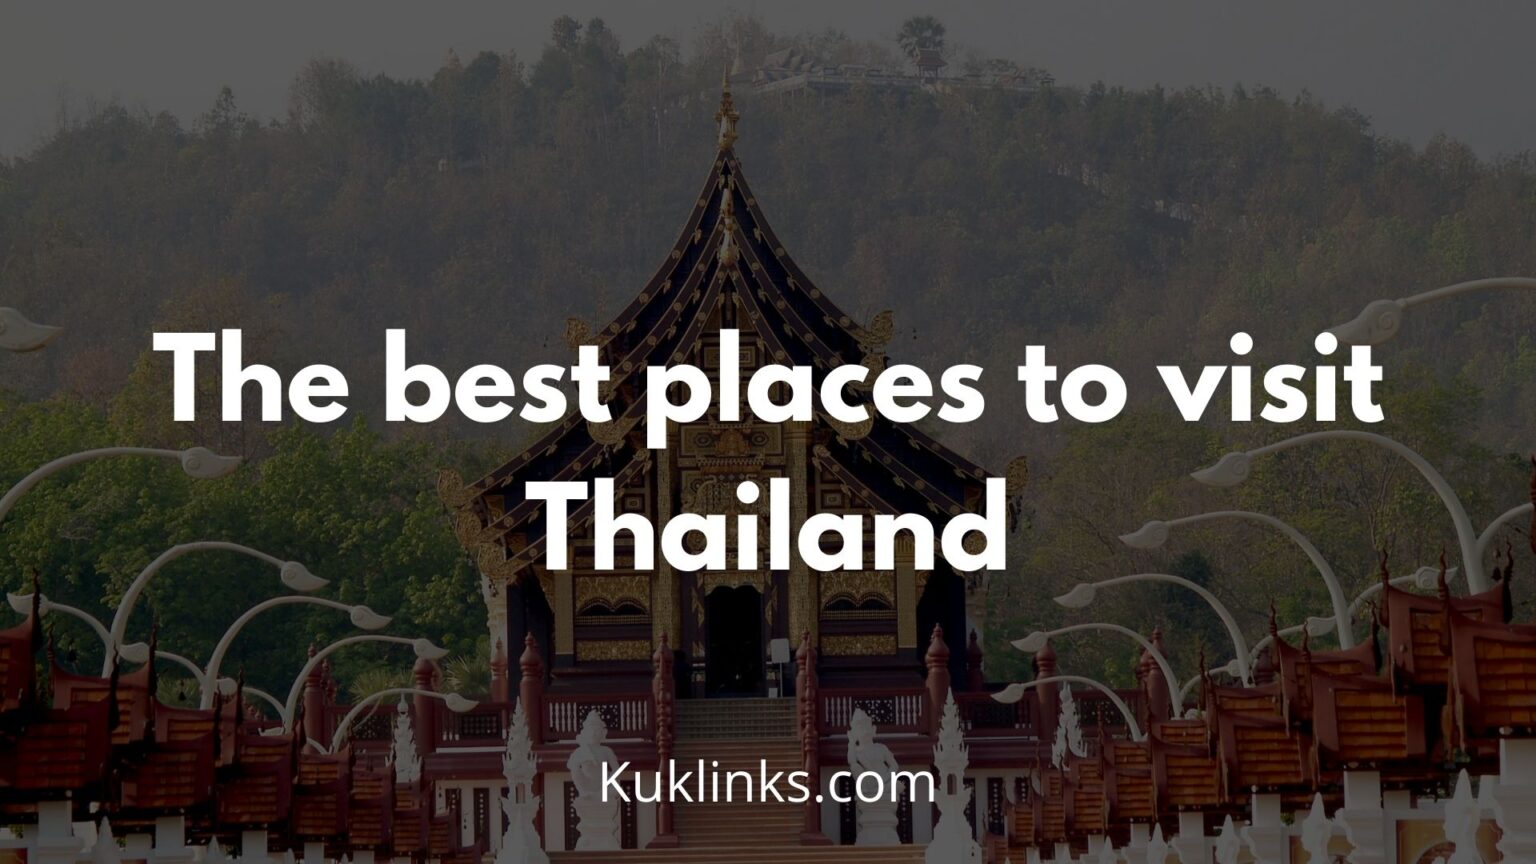 You are currently viewing The best places to visit Thailand